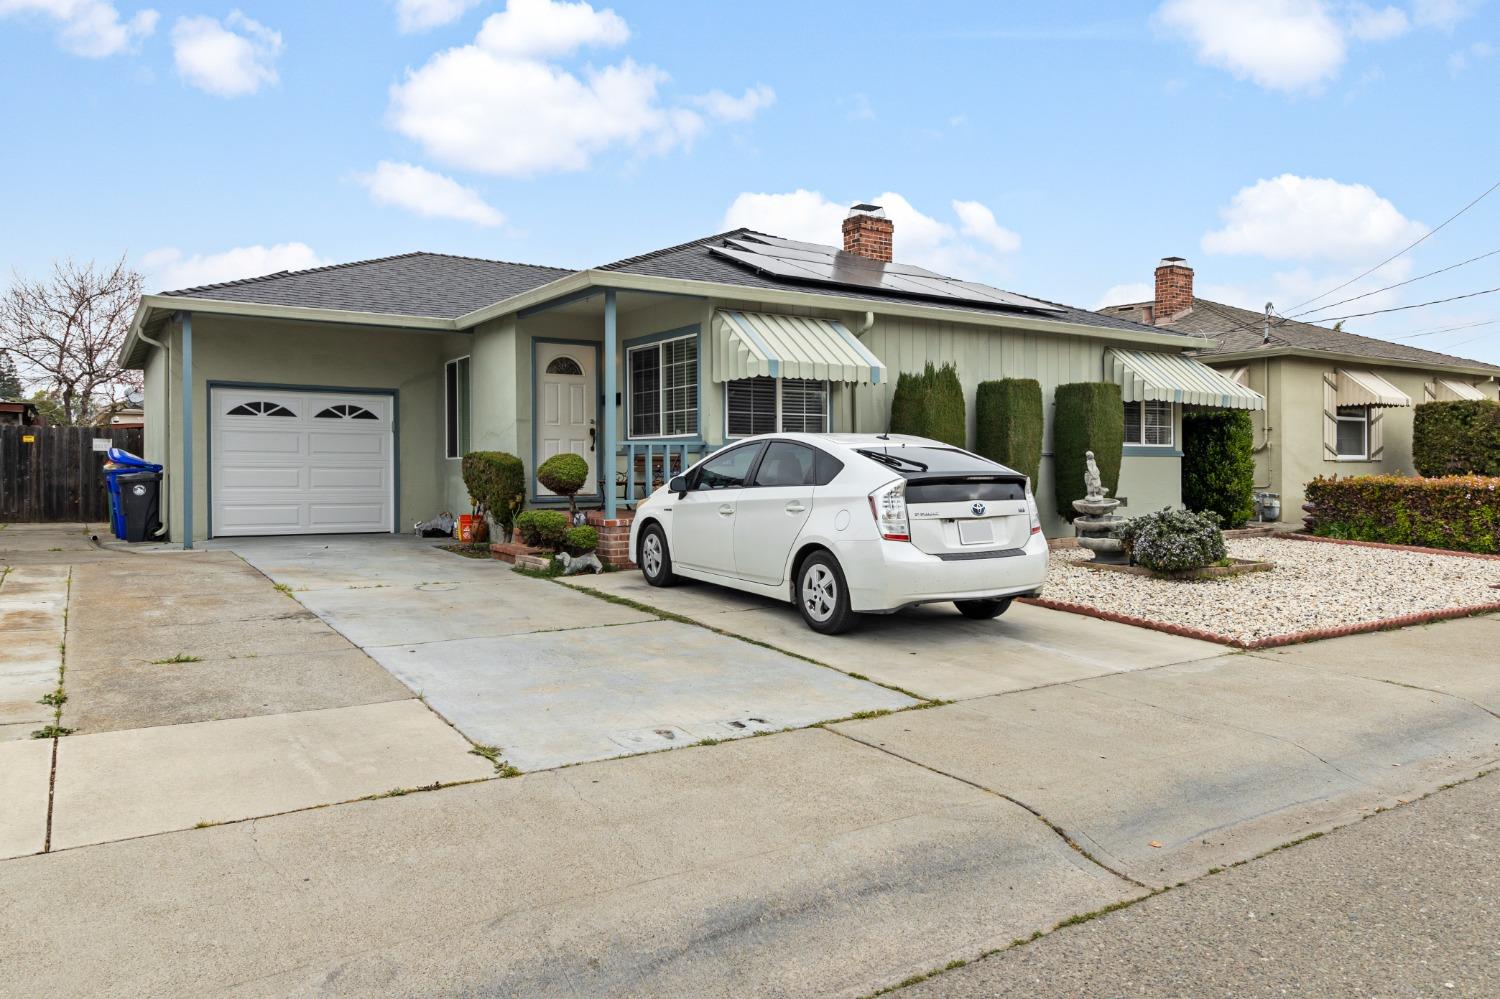 Photo of 1265 Margery Ave in San Leandro, CA